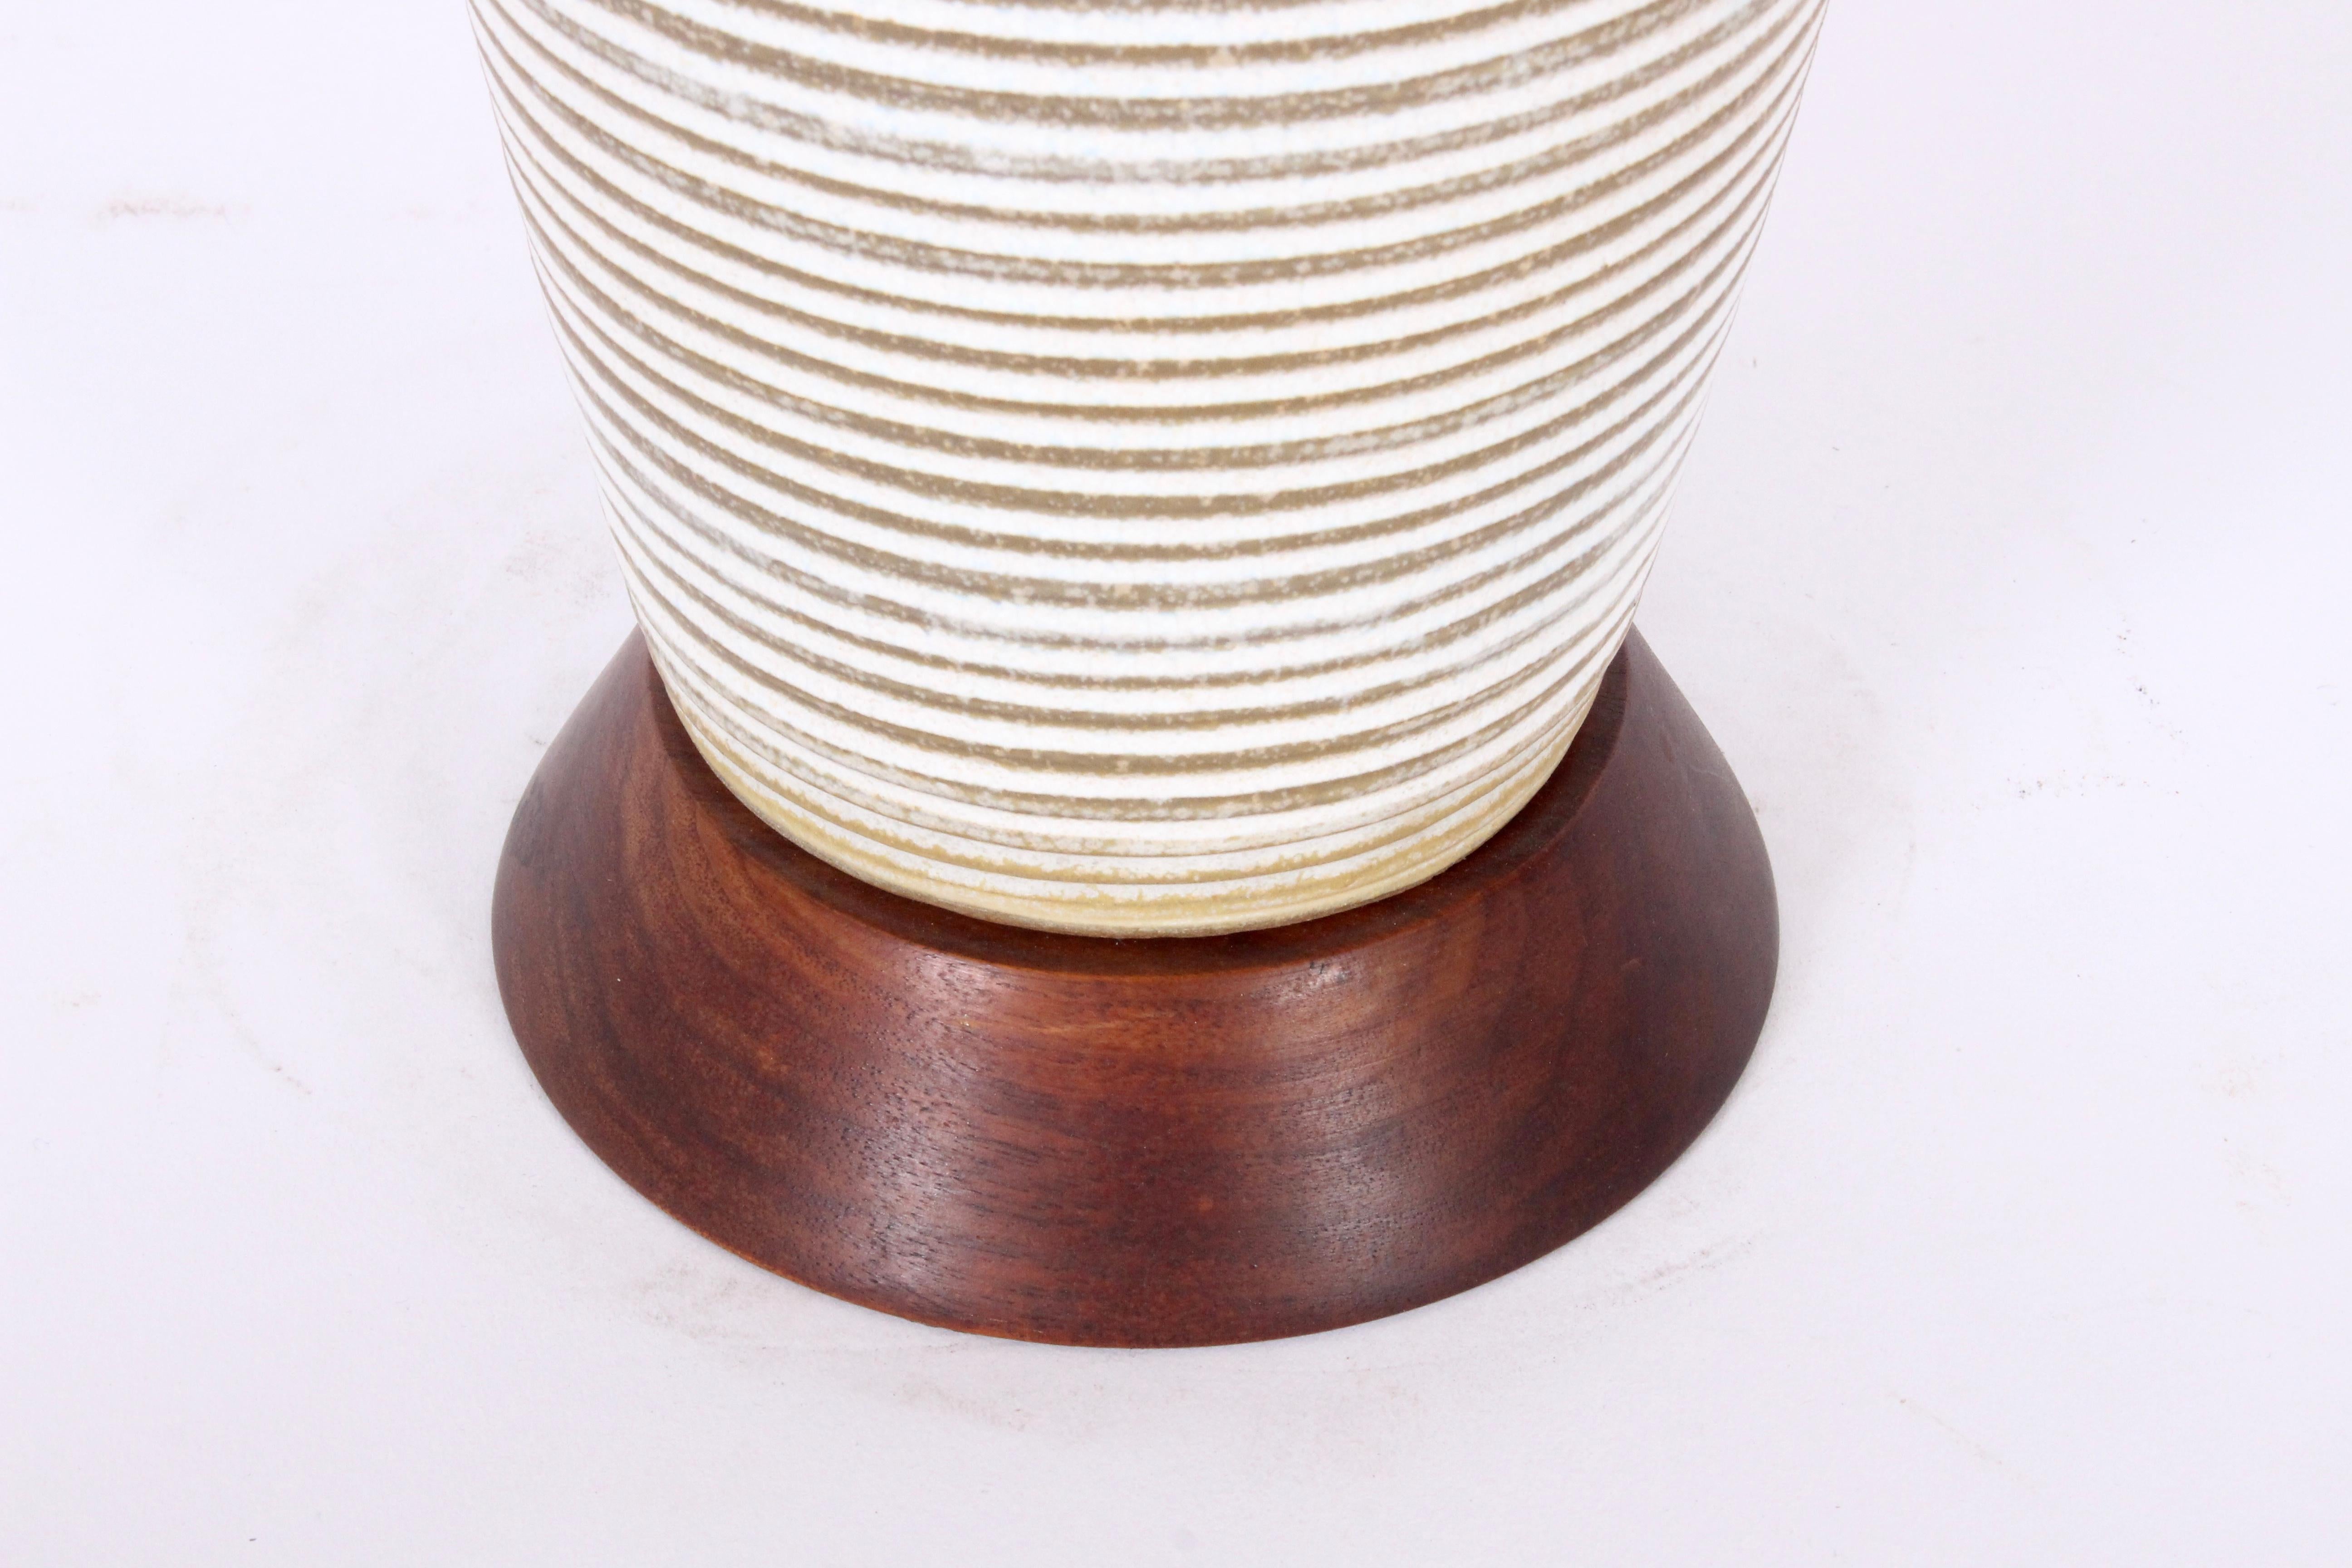 Plated Tall Lee Rosen Design Technics White Banded Drip Glaze Pottery Table Lamp, 1950s For Sale